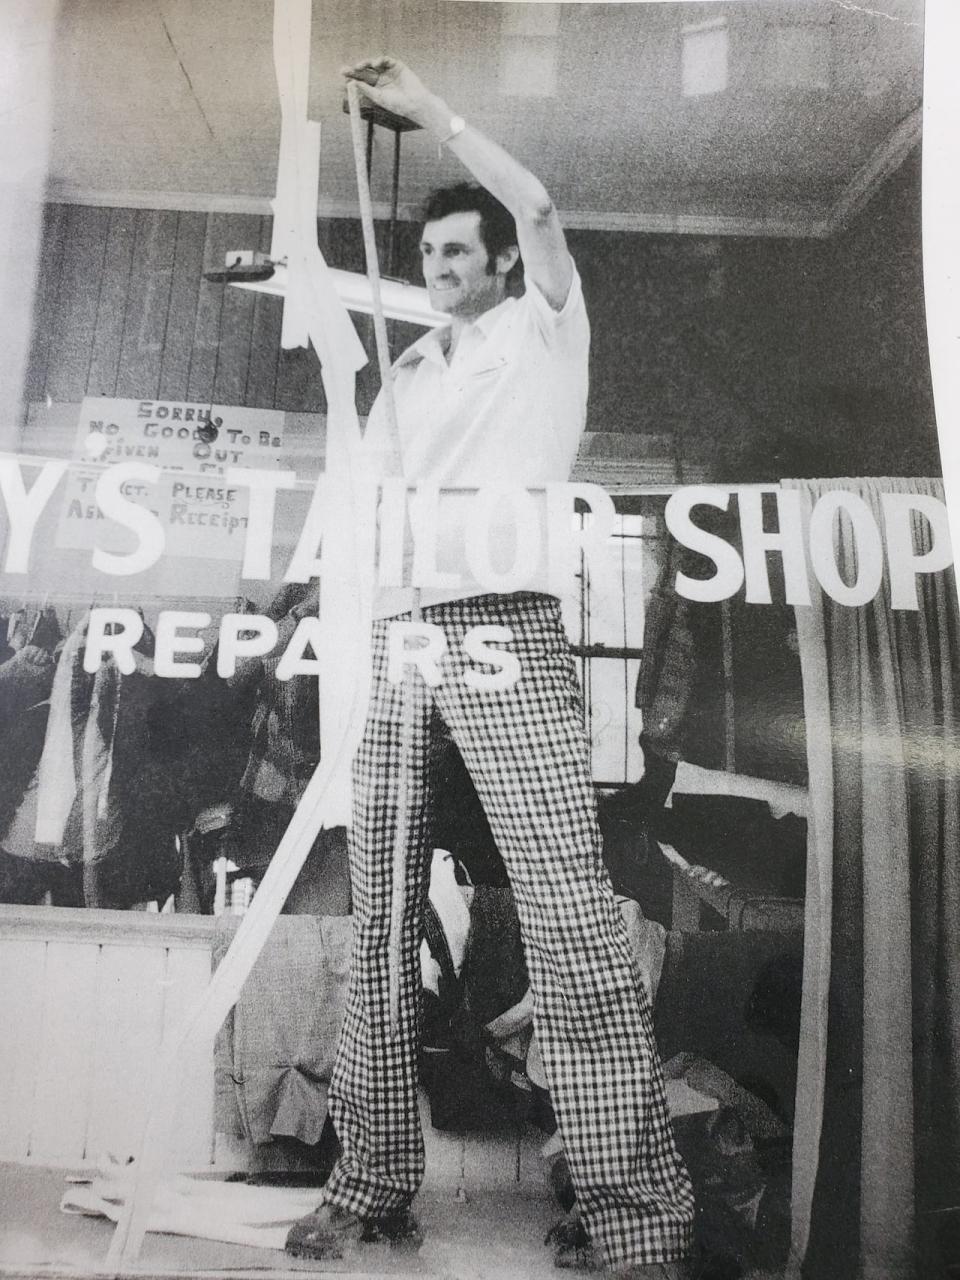 Tony Silver Sr. repairs the window of his shop on Duckworth Street in 1973. After starting his business in his parents' home, Silver rented a place on New Gower Street, at the bottom of Springdale Street on the site of what is now the Hilton Garden Hotel. Then it was on to 337 Duckworth in the Maunder Building until 1977, when he bought the building at 478 Water St. Silver moved to the current location on Freshwater Road in December 1979 and began business the following month.